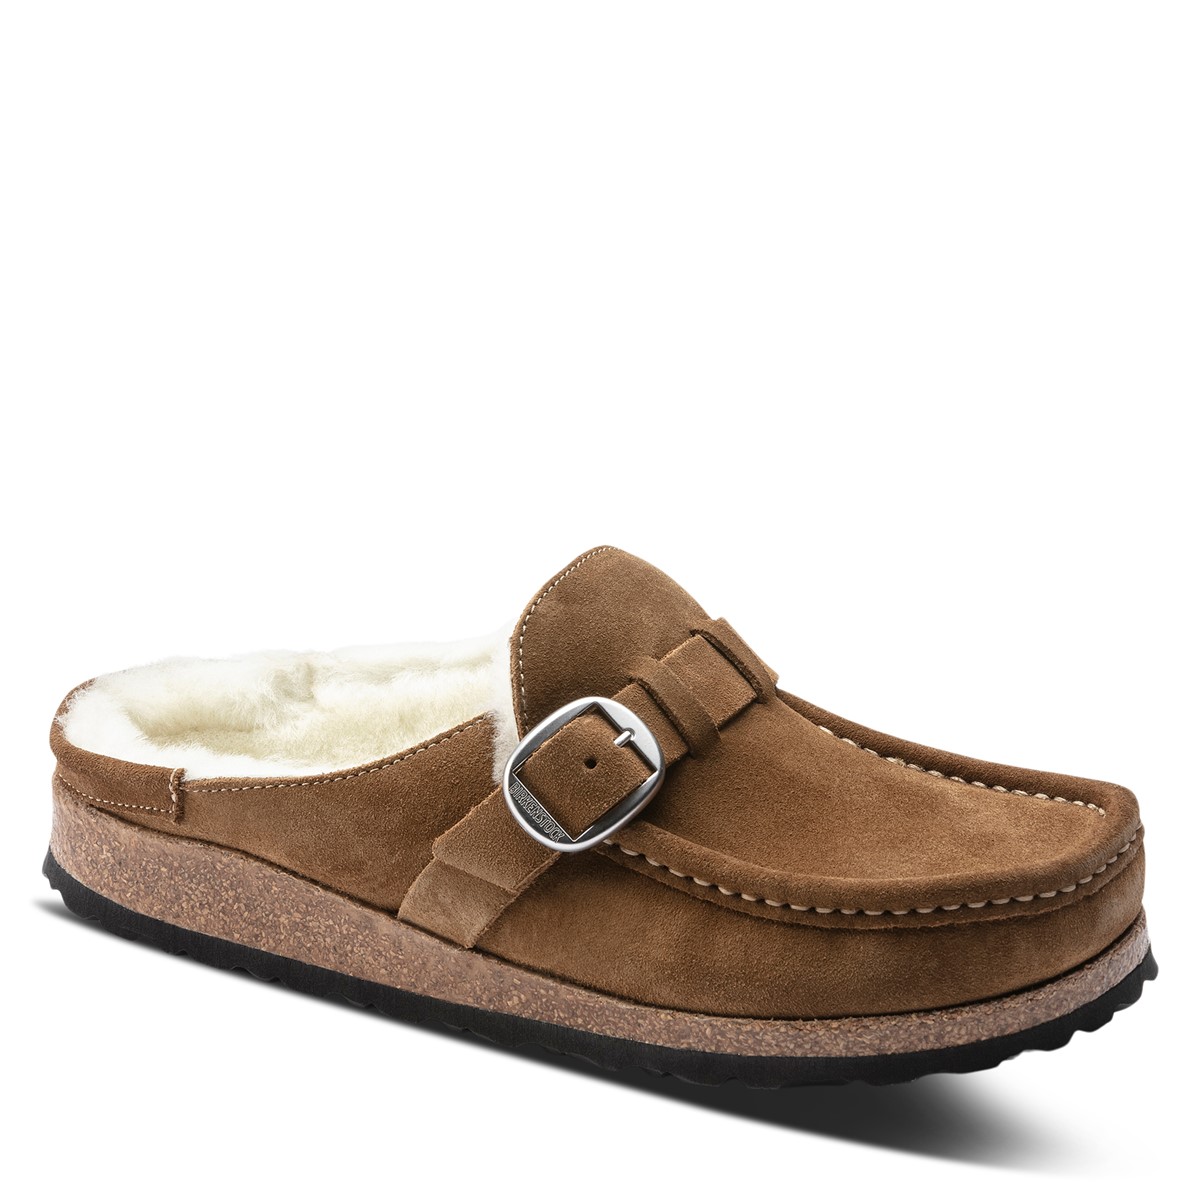 Women's Buckley Moccasin-Style Shearling Clog Slippers in Tea